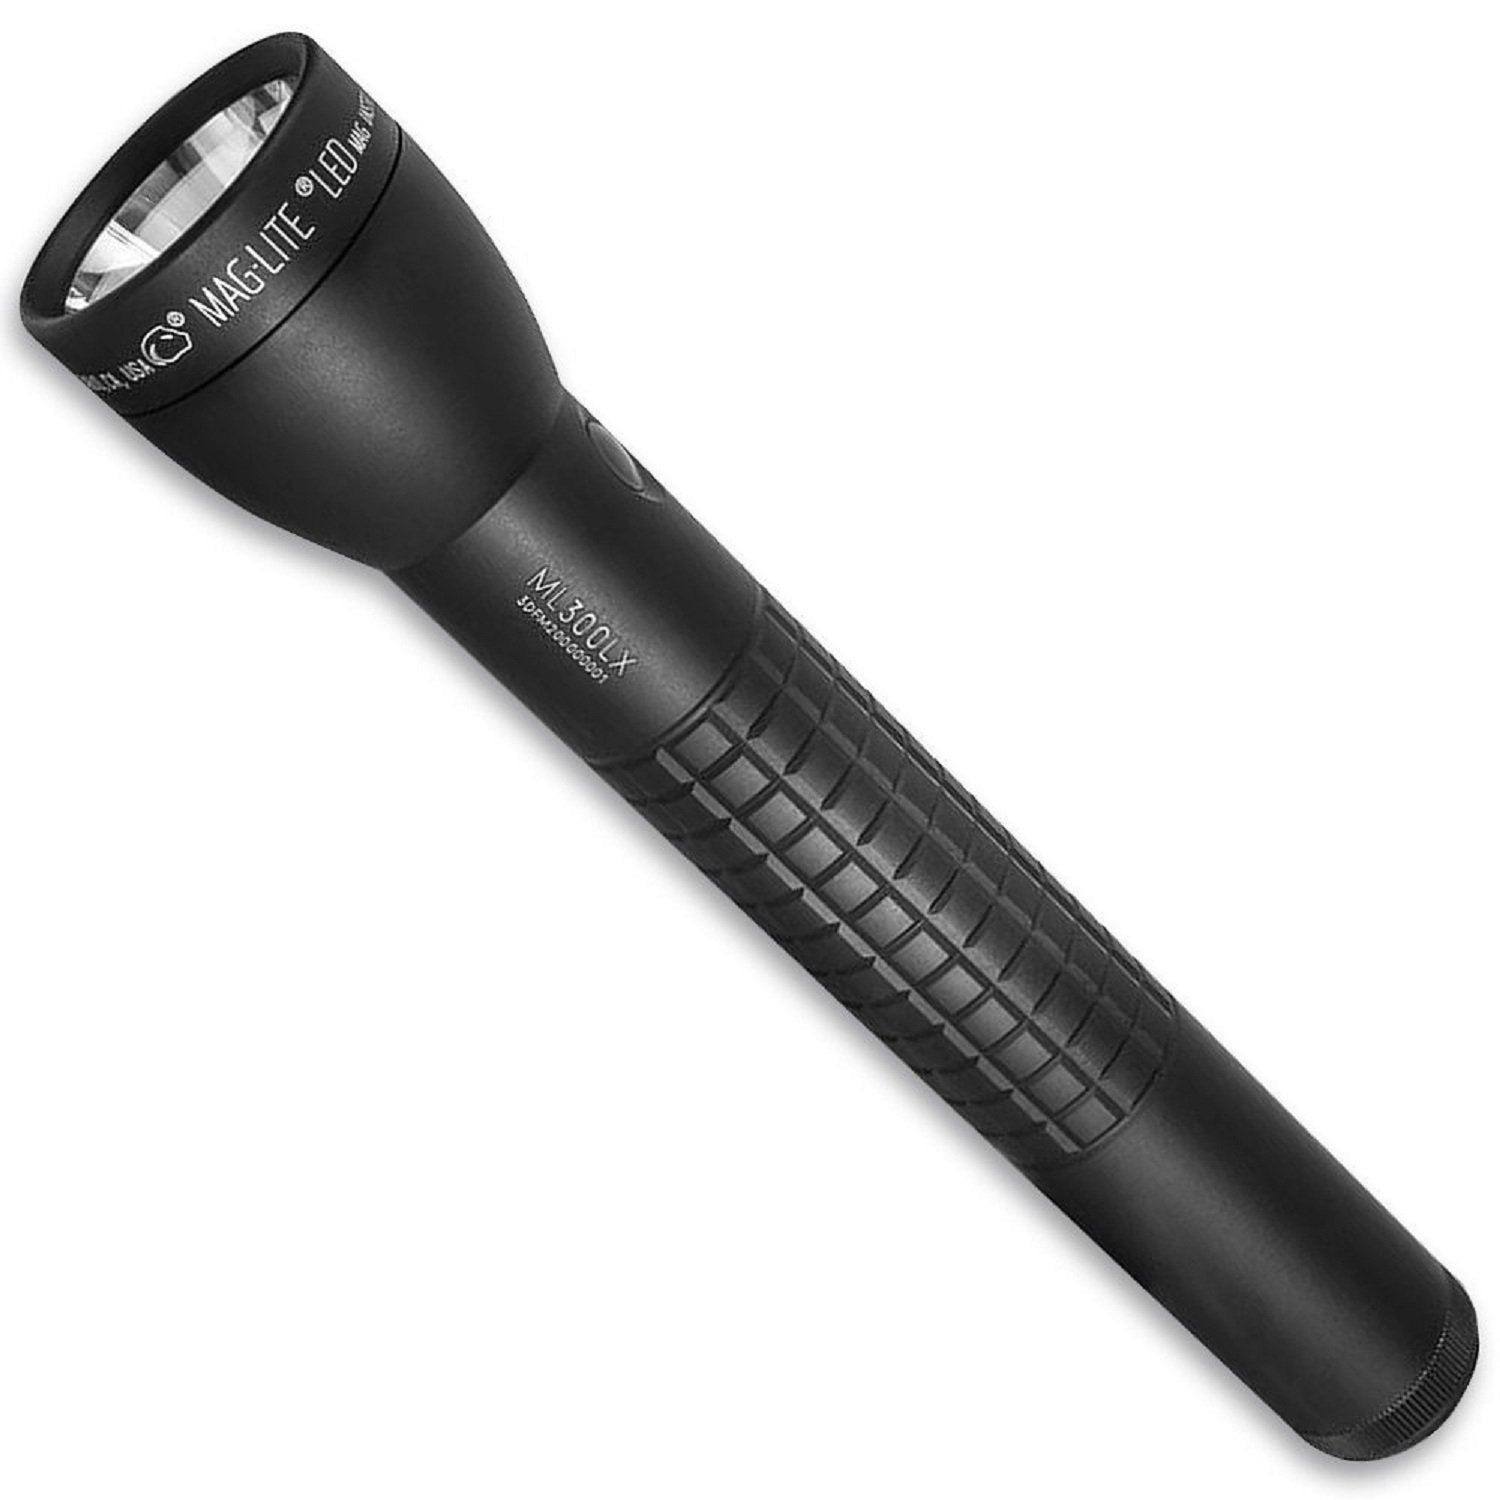 Maglite ML300LX 3D Cell LED Flashlight Black Flashlights and Lighting Maglite Tactical Gear Supplier Tactical Distributors Australia